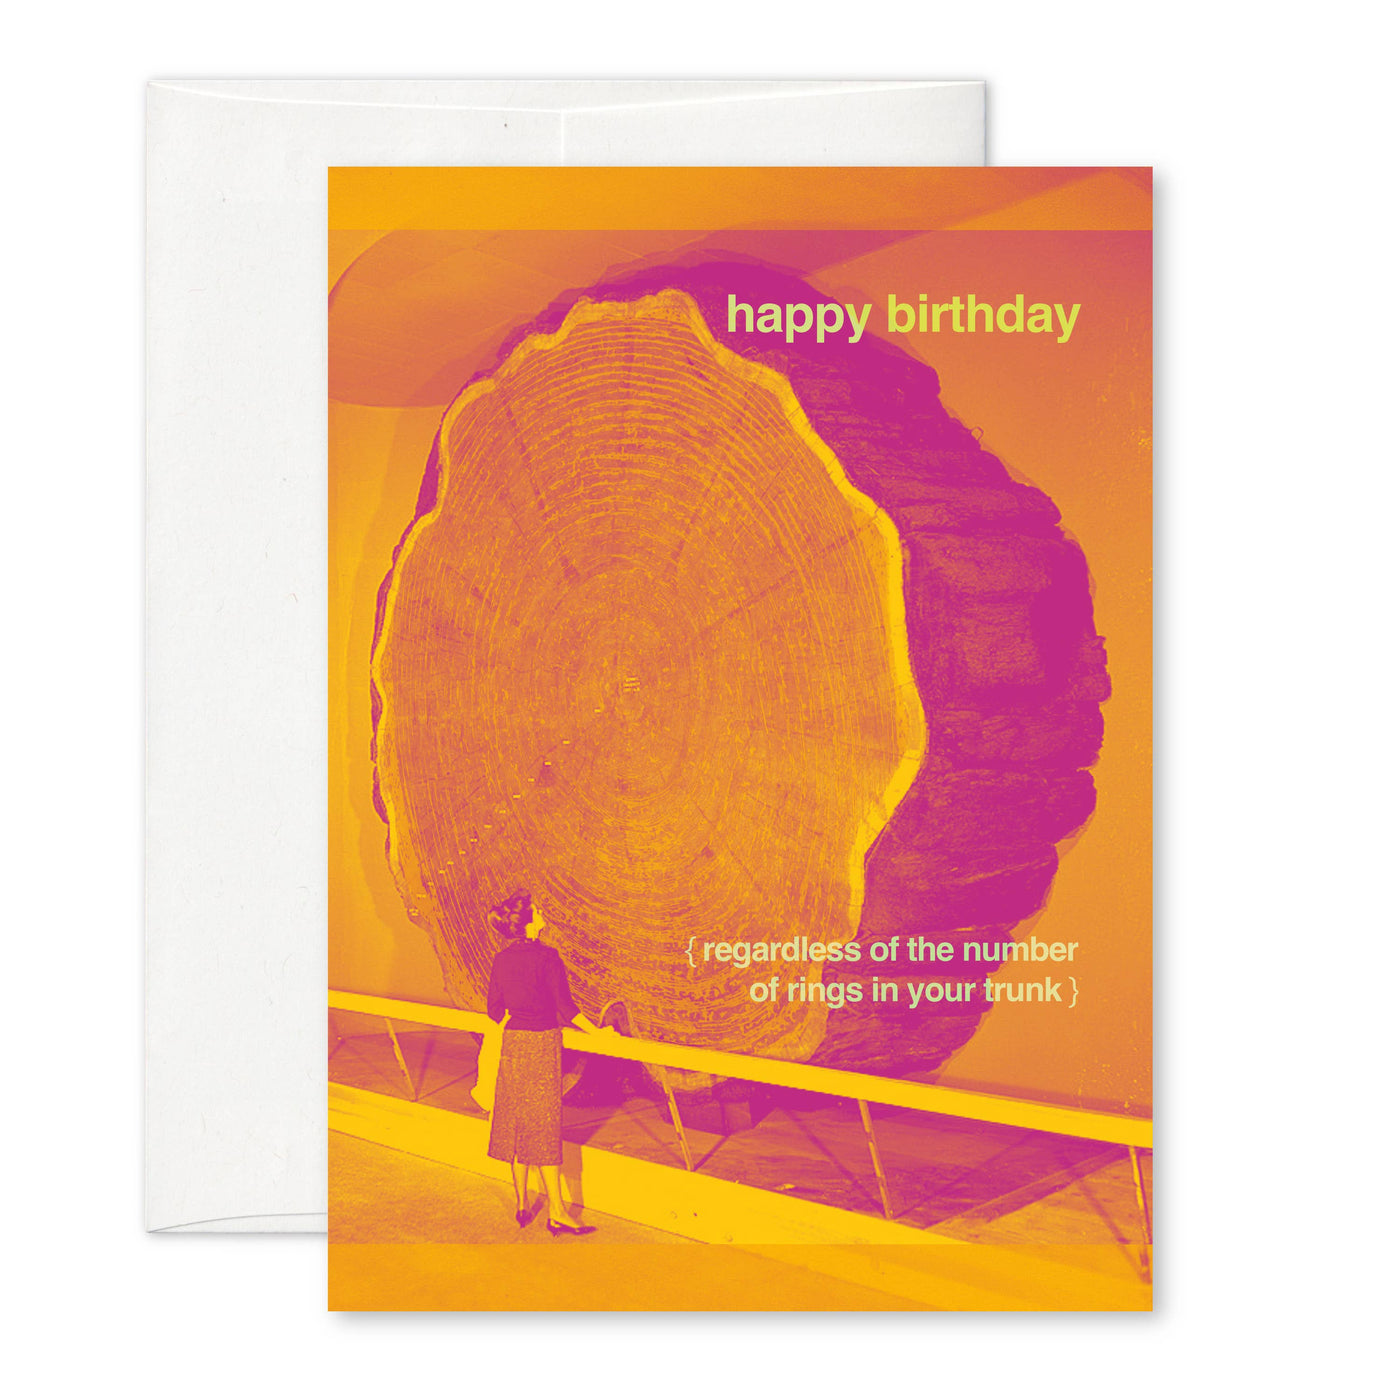 "Dendrochronology" A6 birthday card: Recycled white envelopes